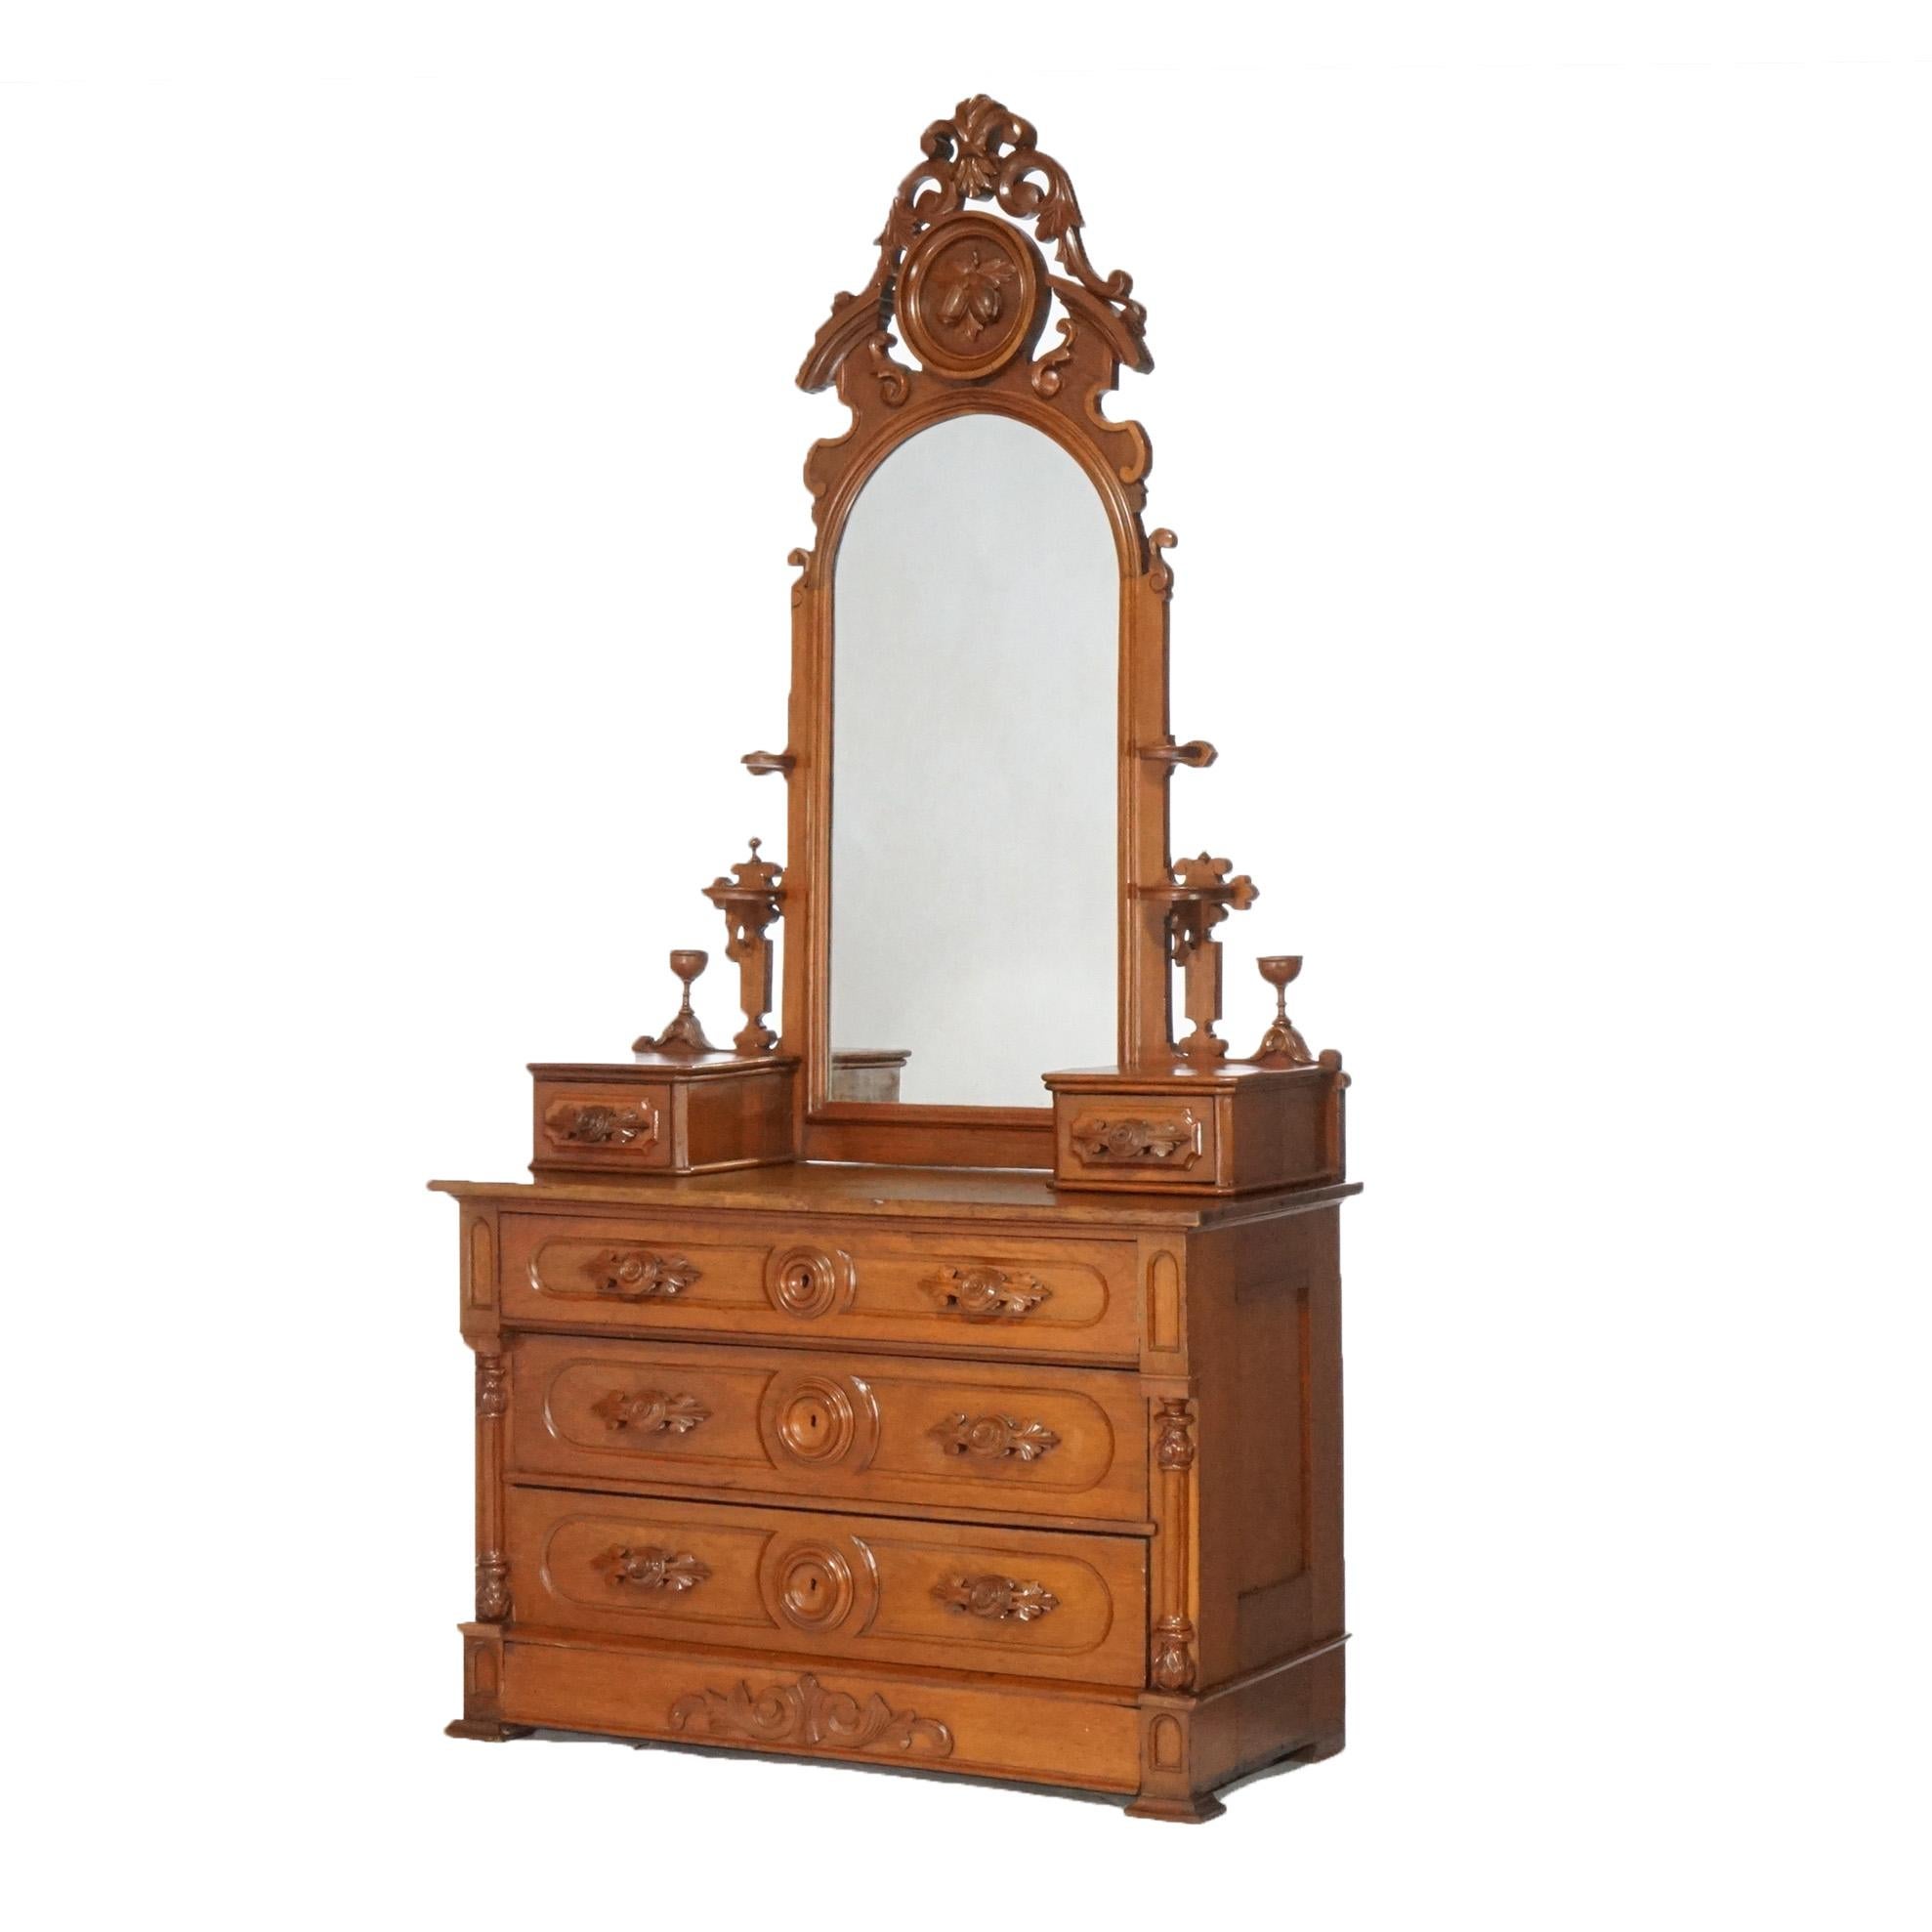 An antique Renaissance Revival mirrored chest of drawers offers dressing mirror with carved scroll and nut crest over dresser having three long drawers with flanking glove boxes and columns, circa 1880
Measures- 93.5''H x 49''W x 20.75''D.